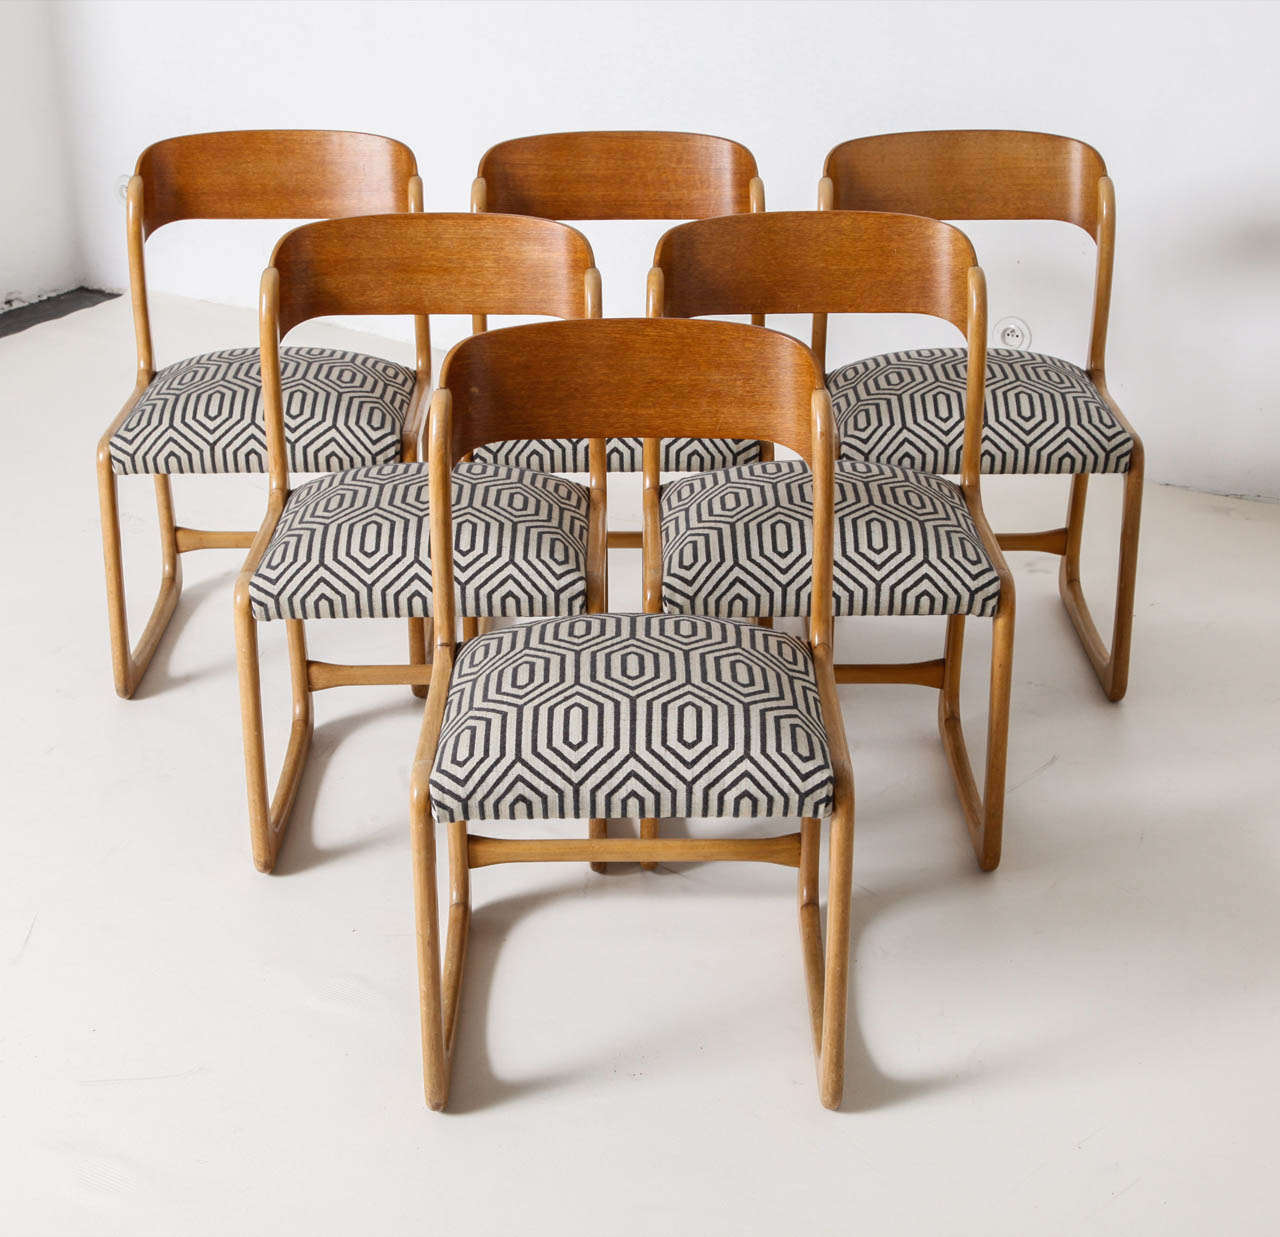 6 chairs by Stella
All original, new upholstered with very decorative fabric.
France, 70's